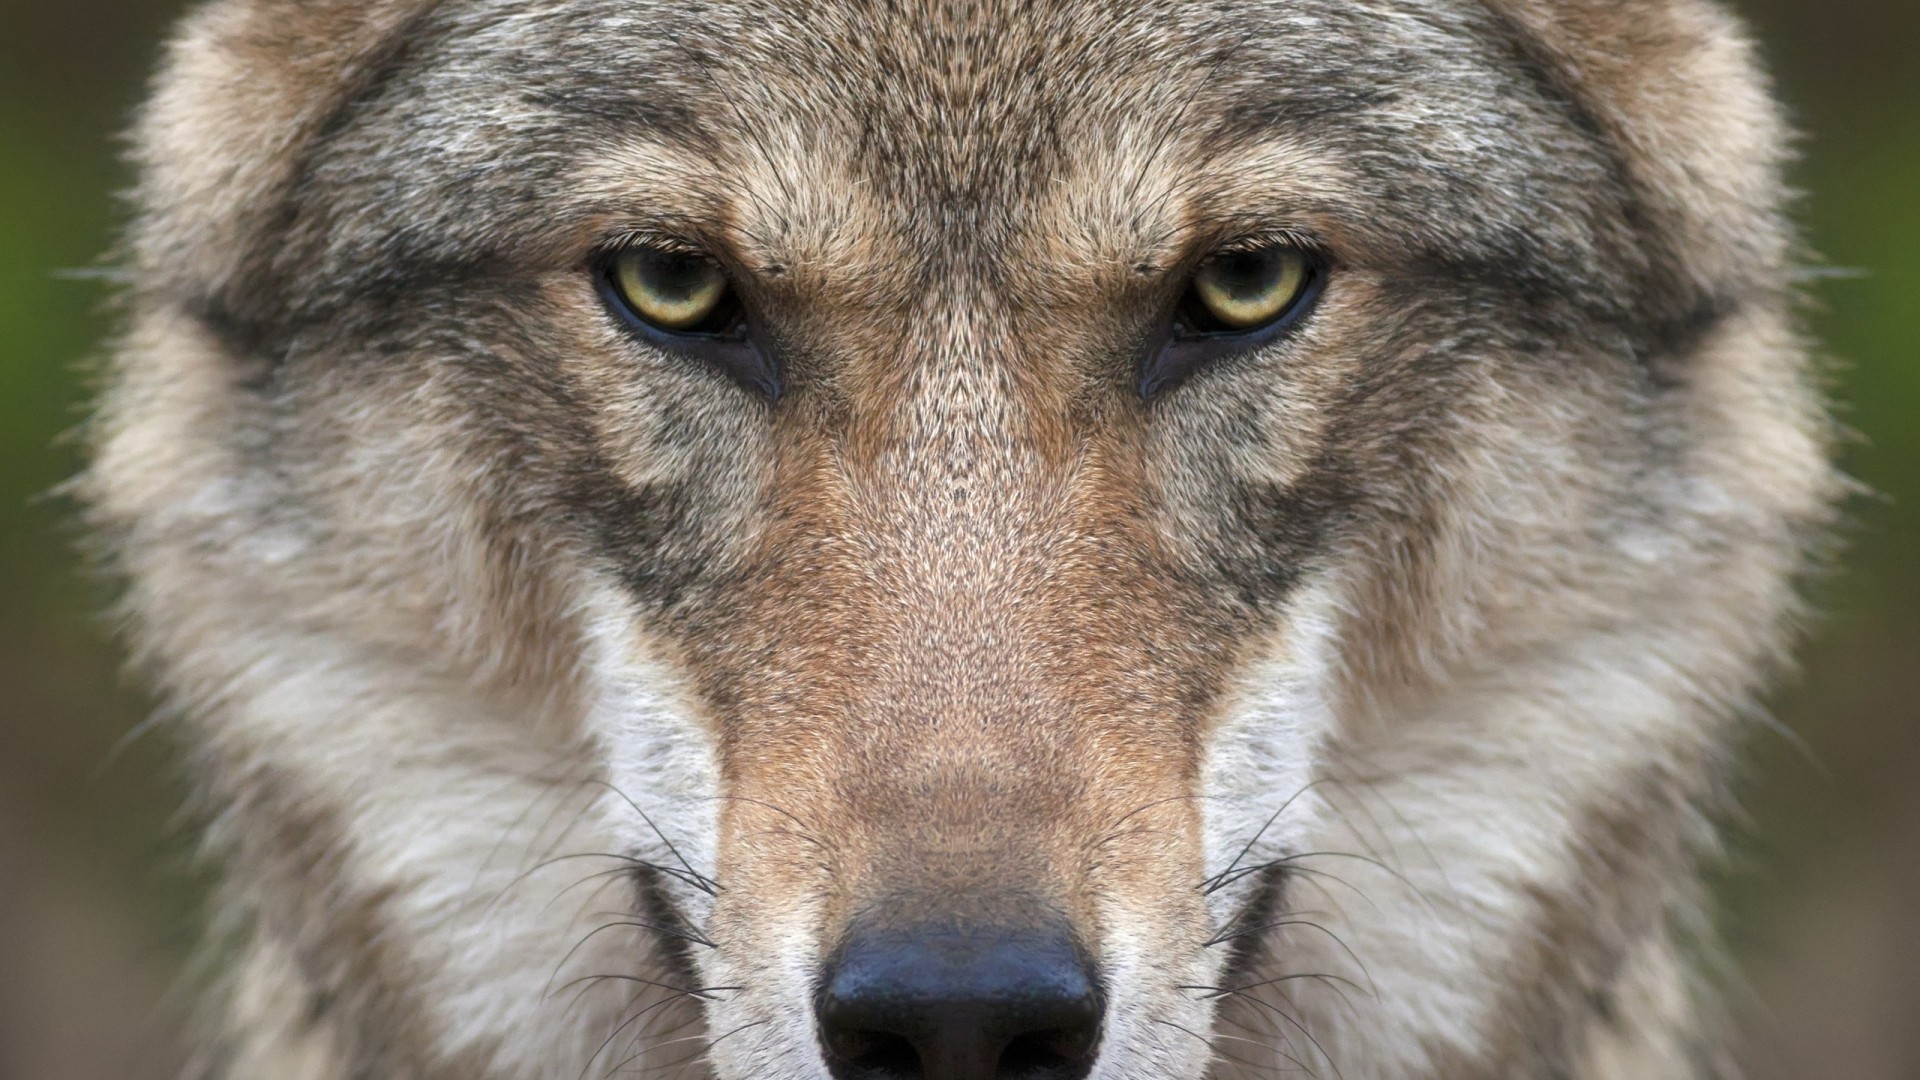 General 1920x1080 wolf animals nature closeup face symmetry frontal view mammals animal eyes